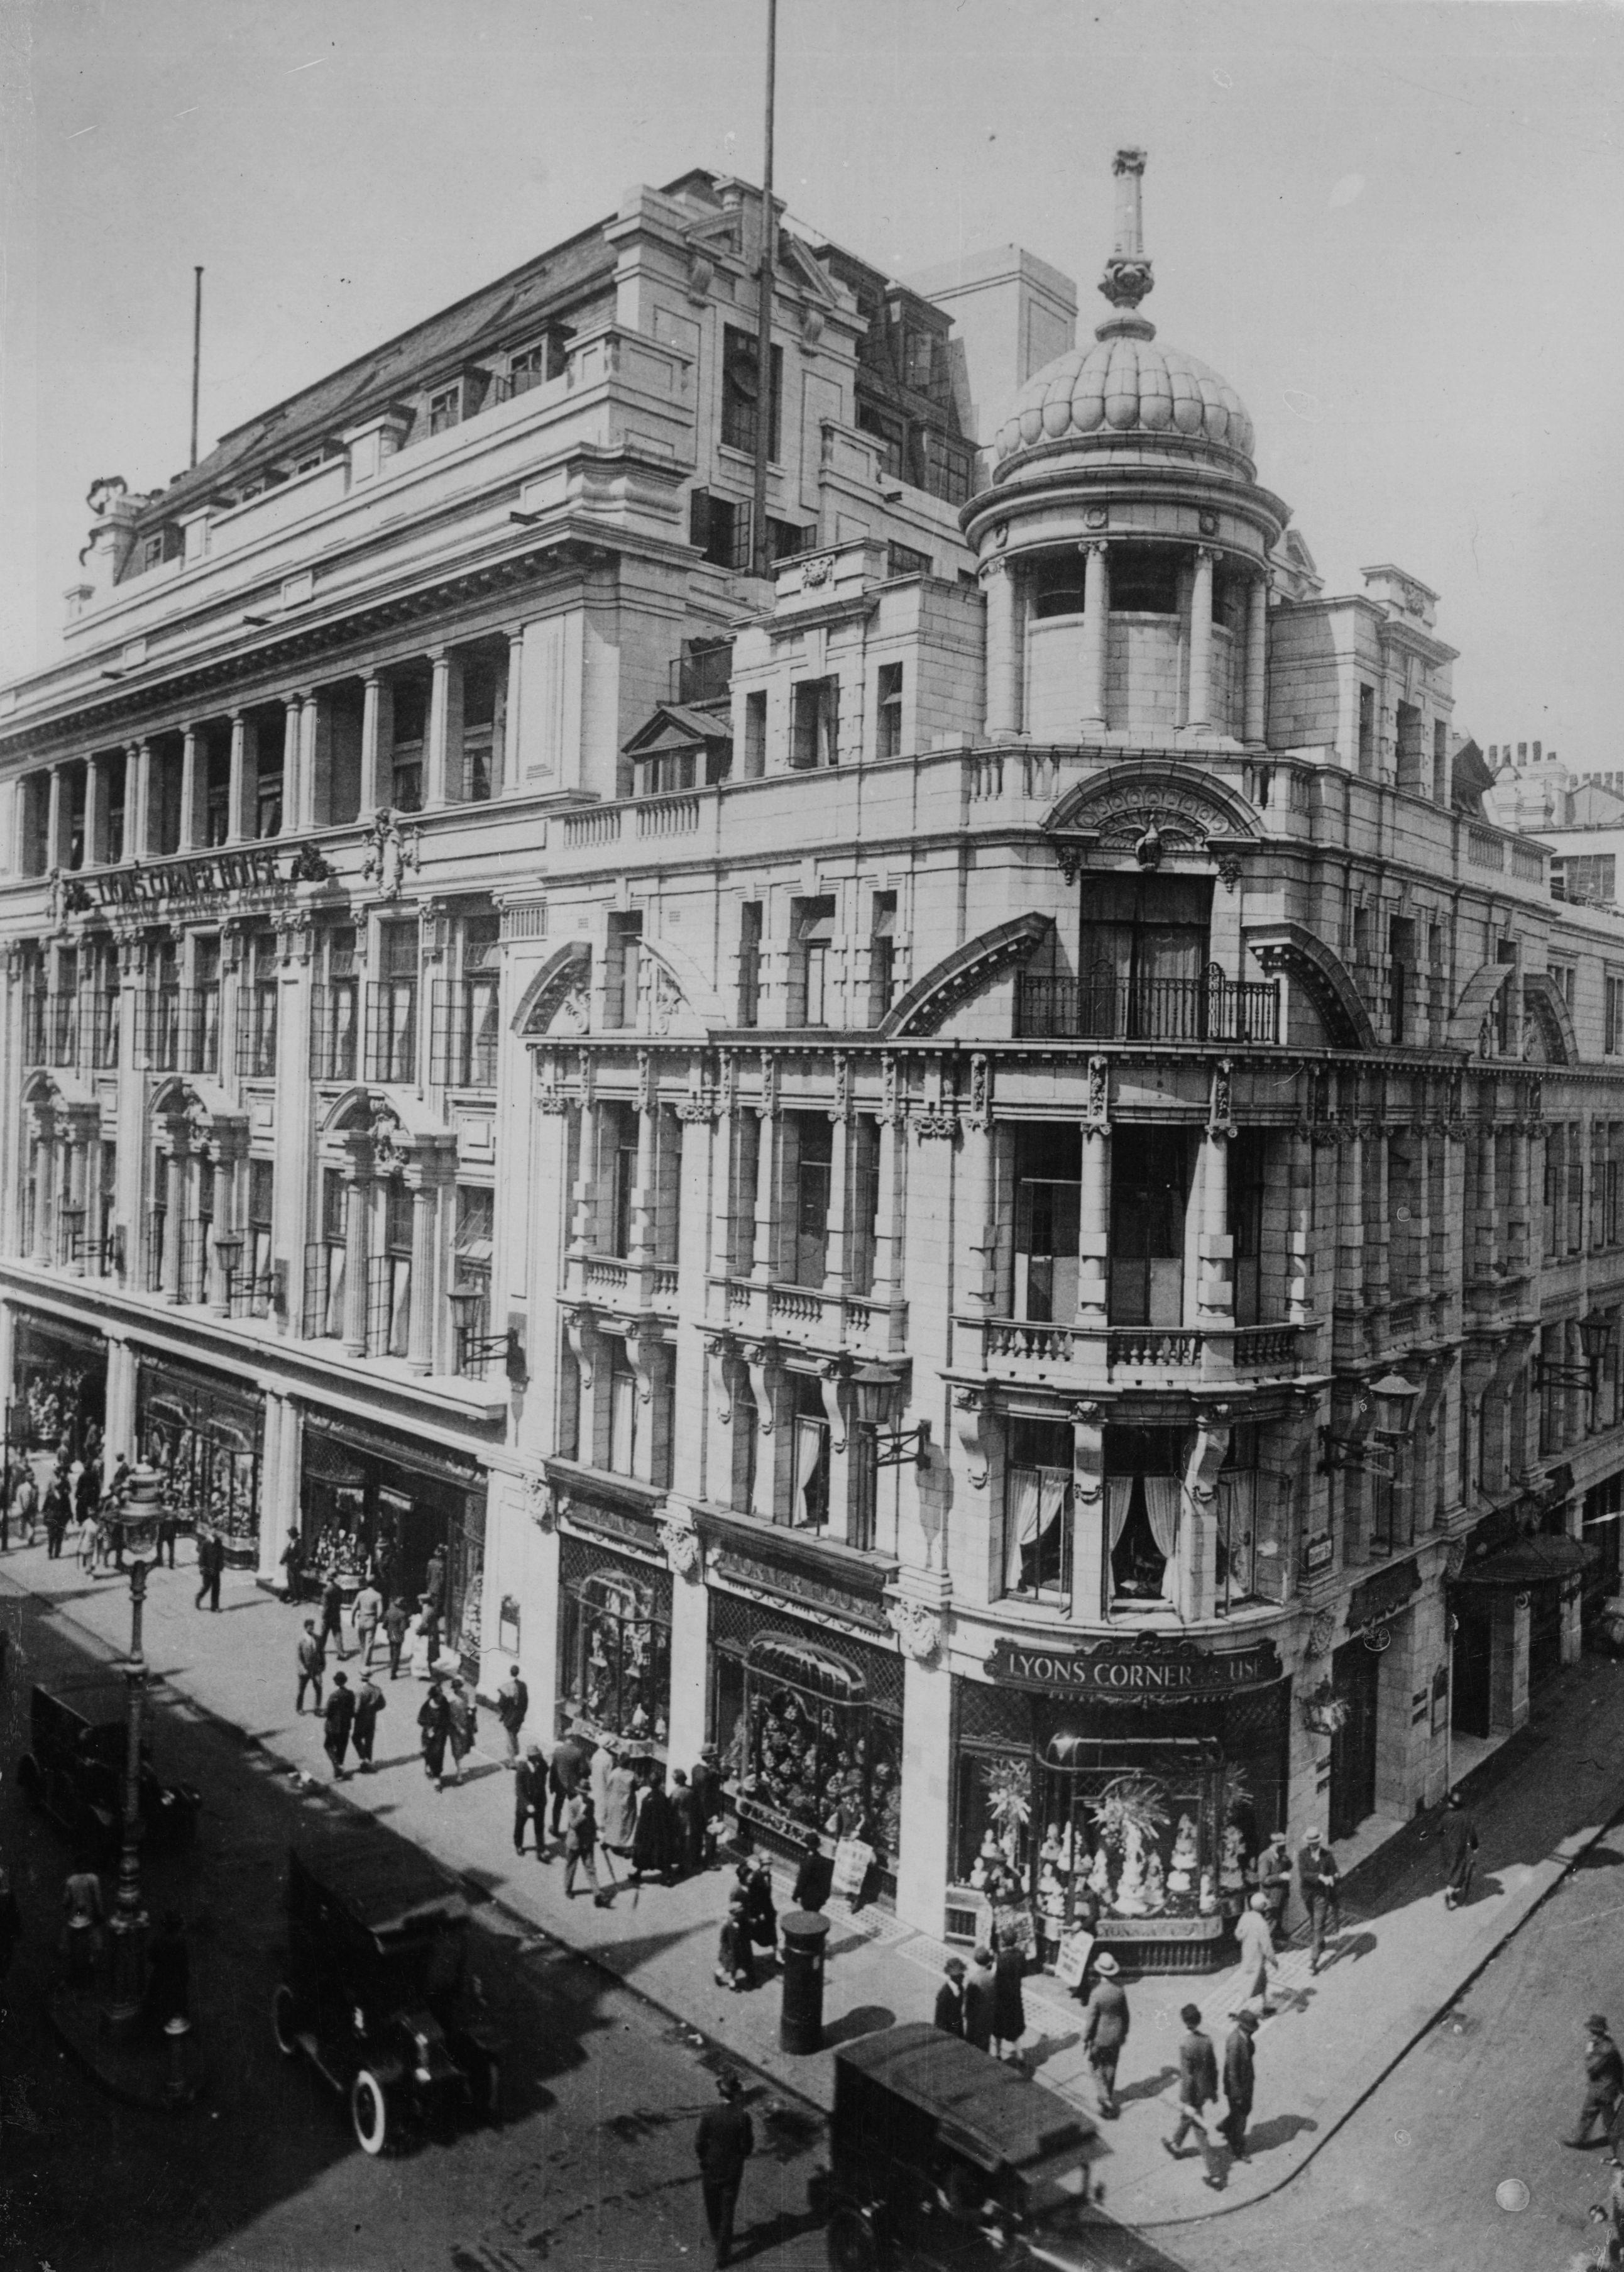 circa 1930: Lyon's Corner House on junction of Coventry Street and Rupert Street in Piccadilly, London W1. (Photo by Sasha/Keystone/Getty Images)